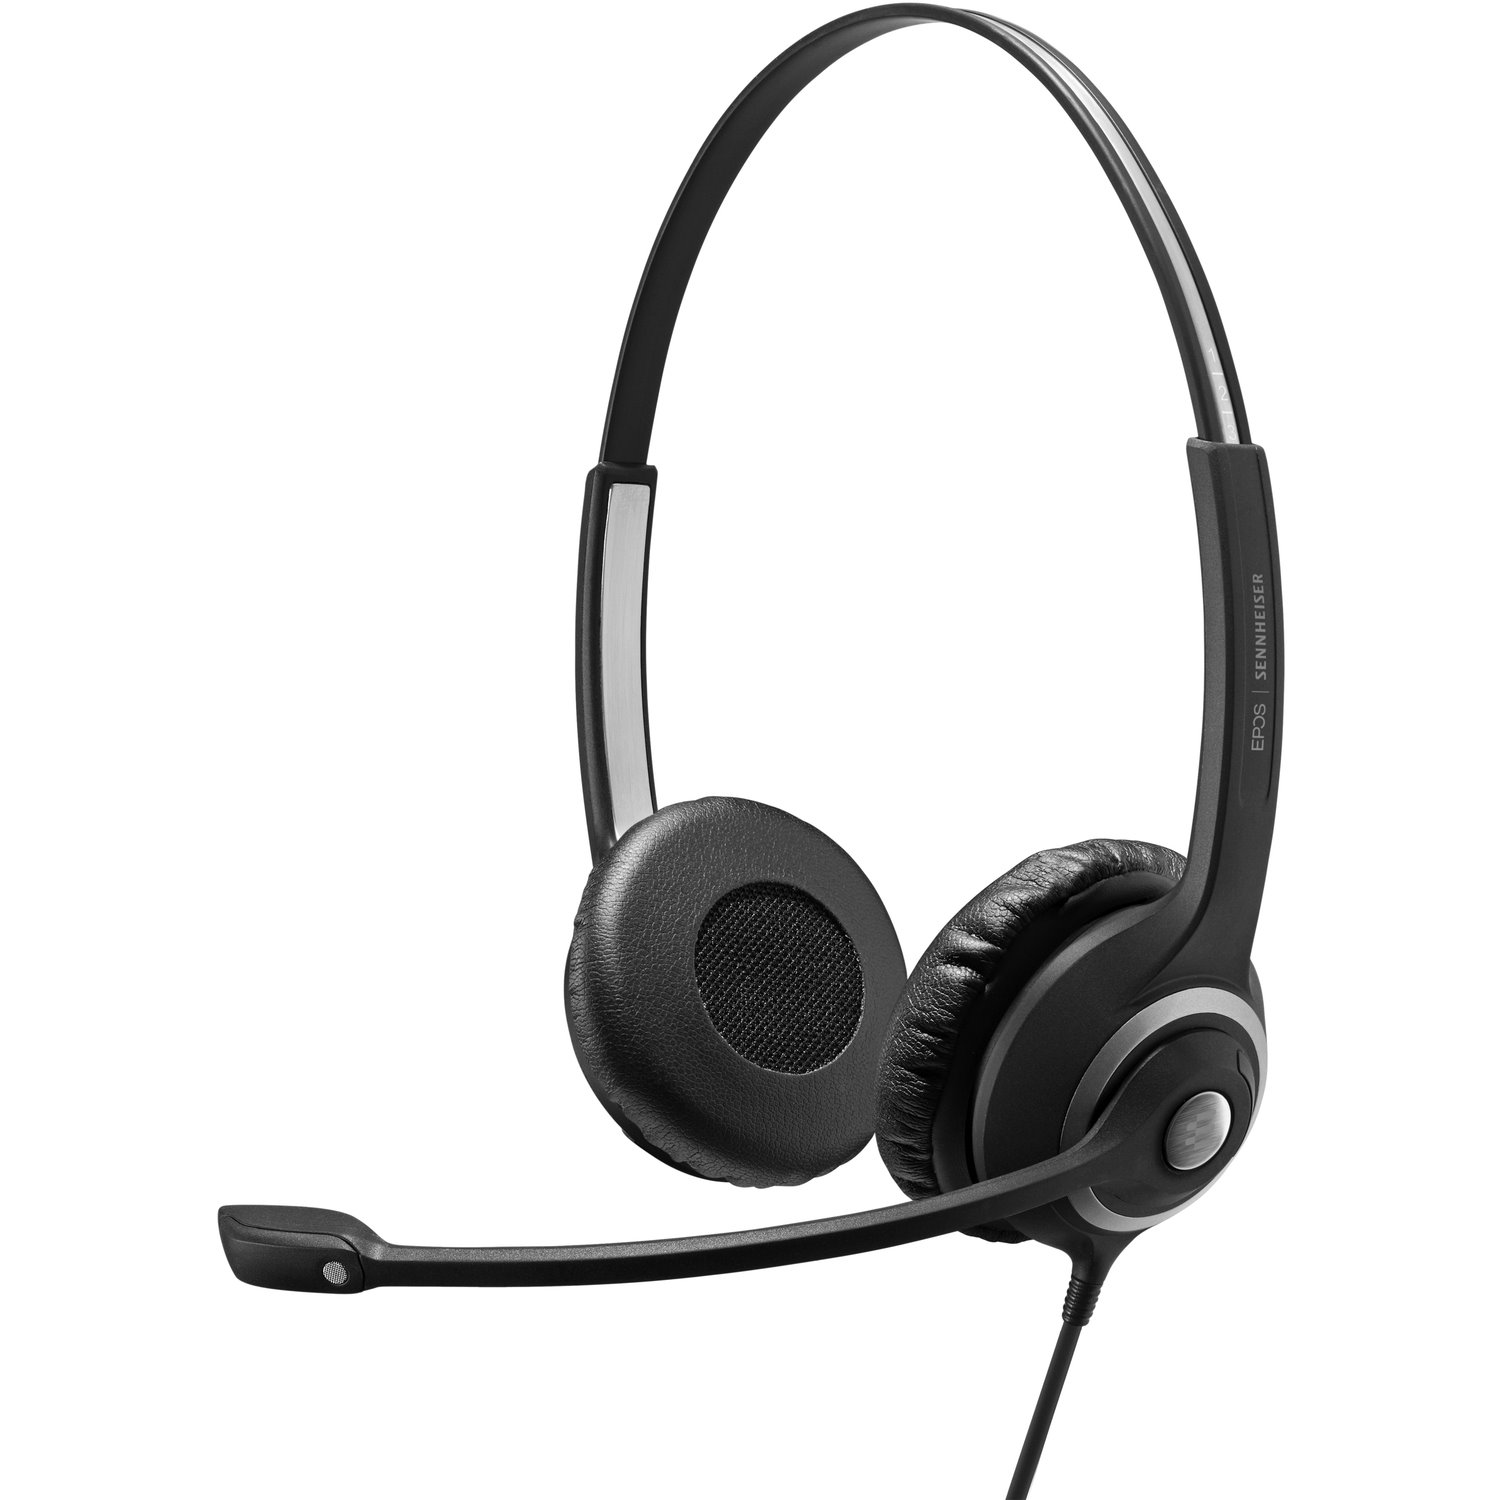 EPOS IMPACT SC 262 Wired On-ear Stereo Headset - Black